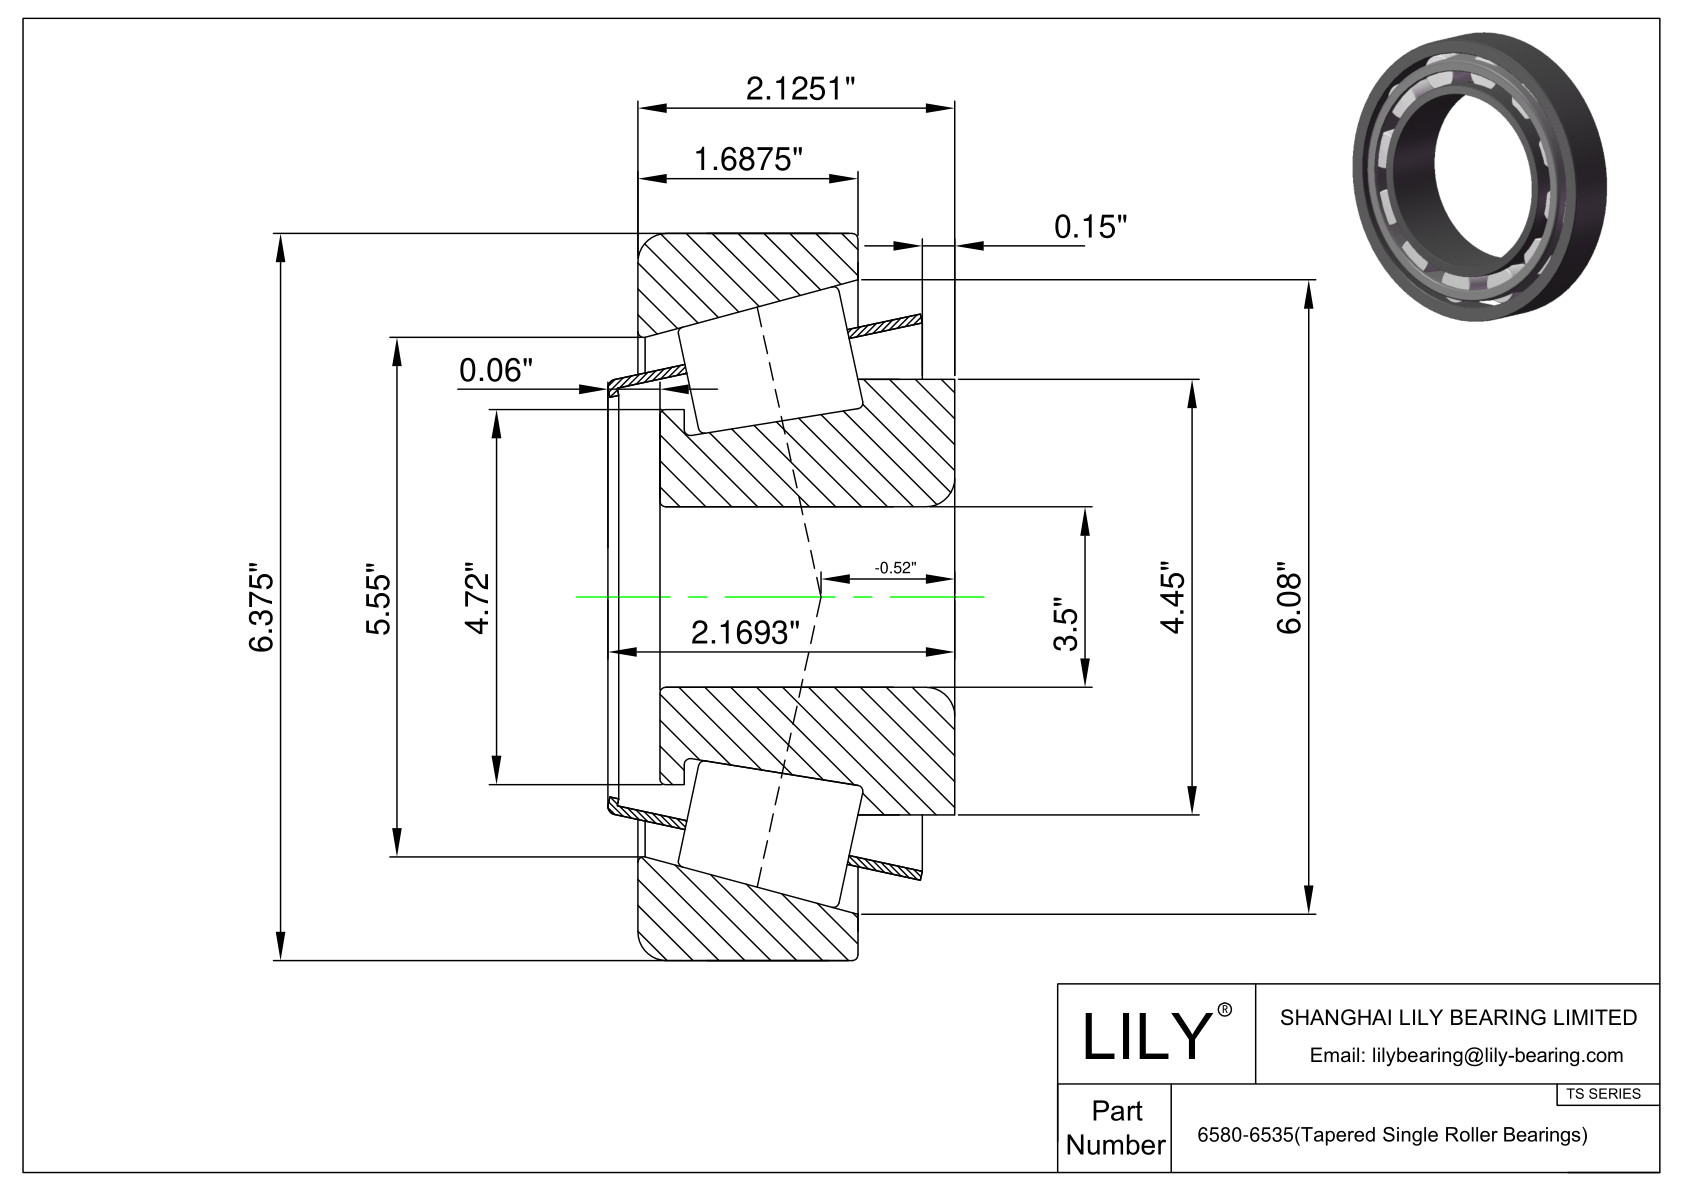 6580-6535 TS (Tapered Single Roller Bearings) (Imperial) cad drawing